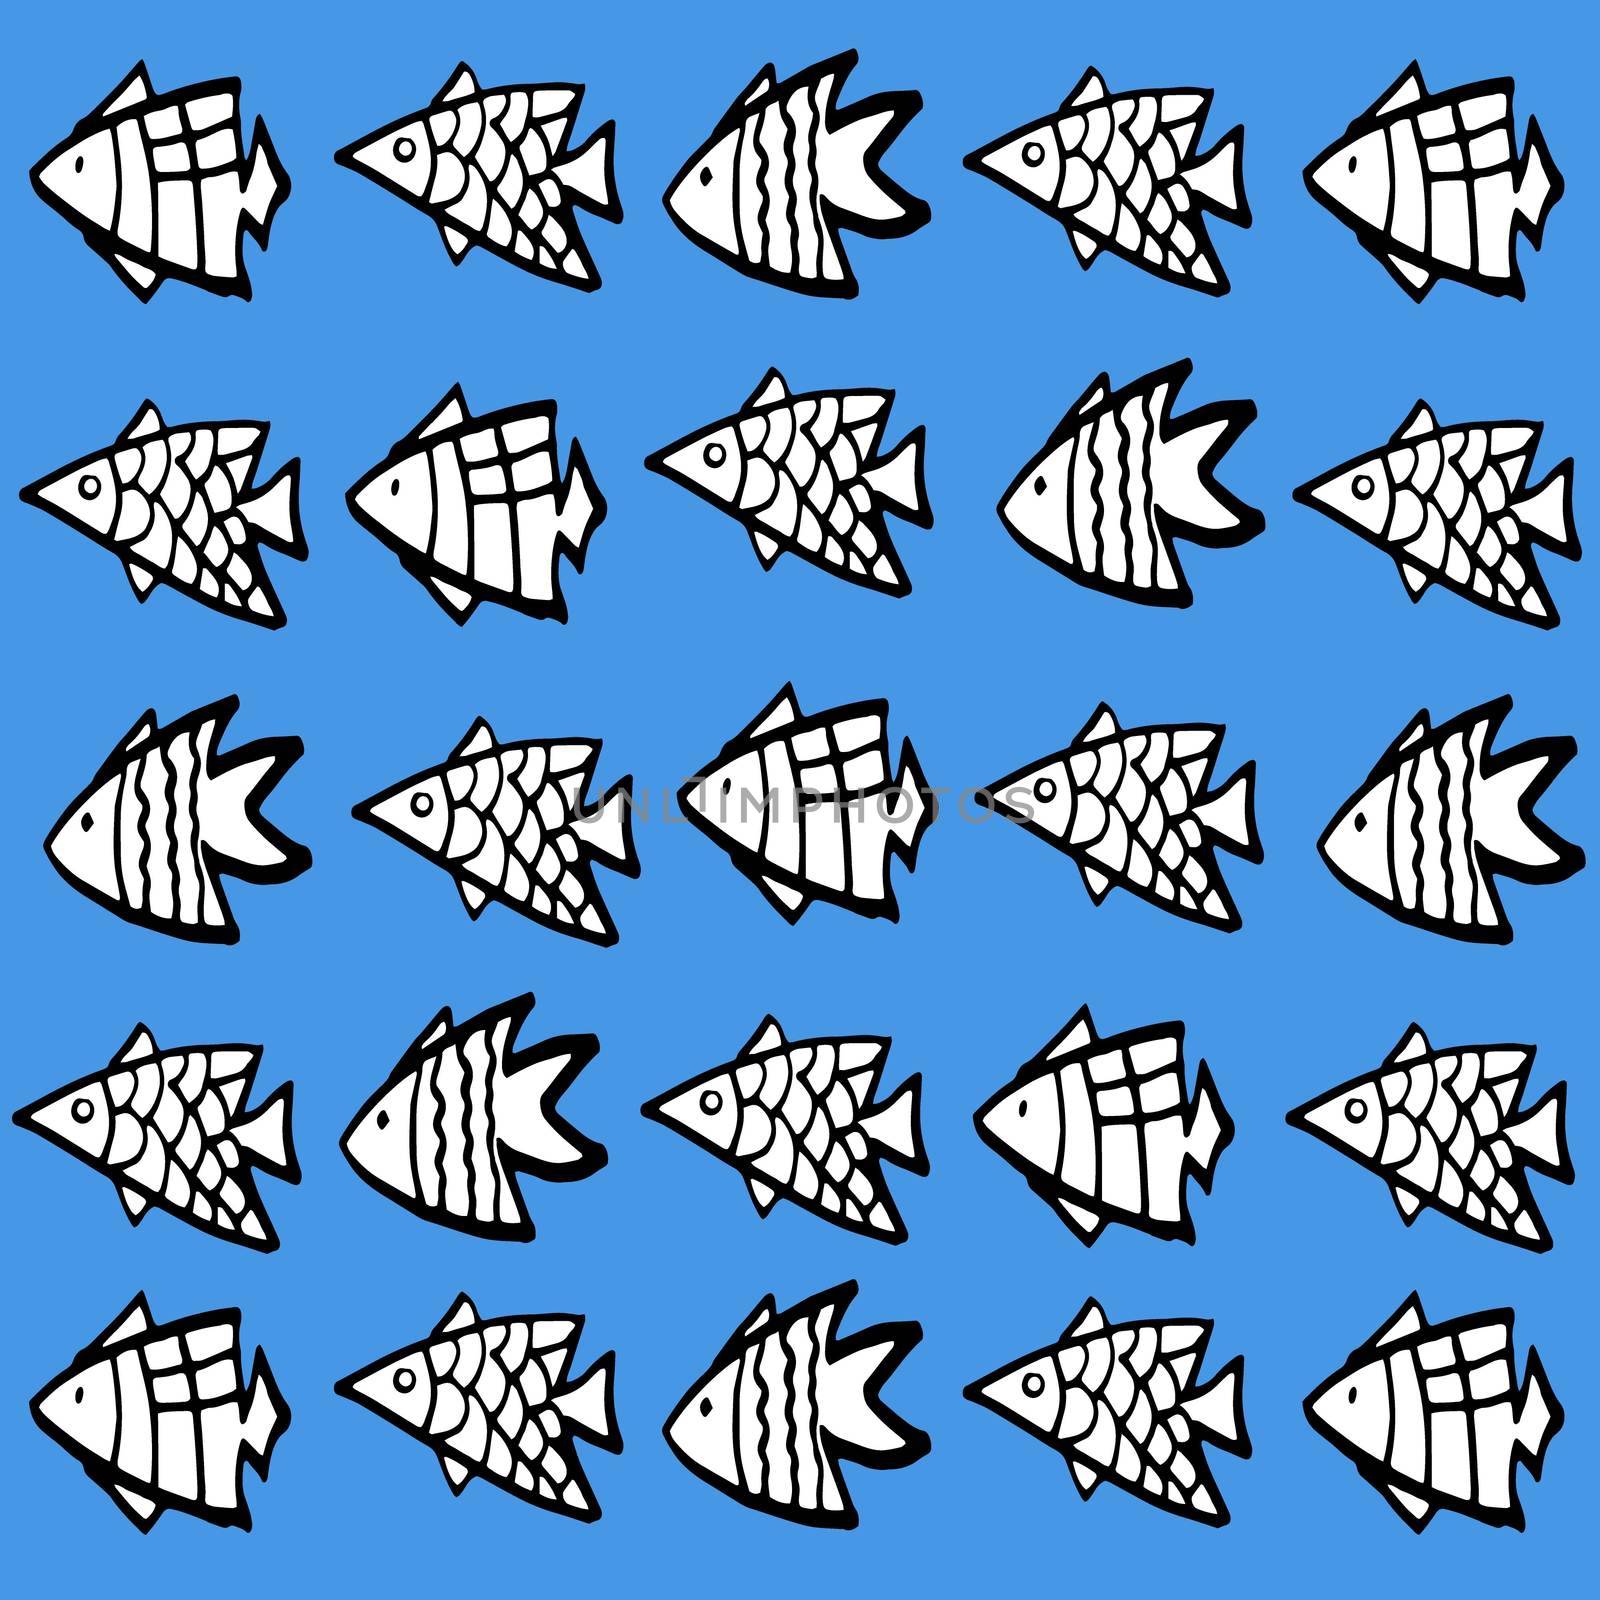 Pattern with black and white fish on the blue background. Card with fish that swim in a line one after the other.